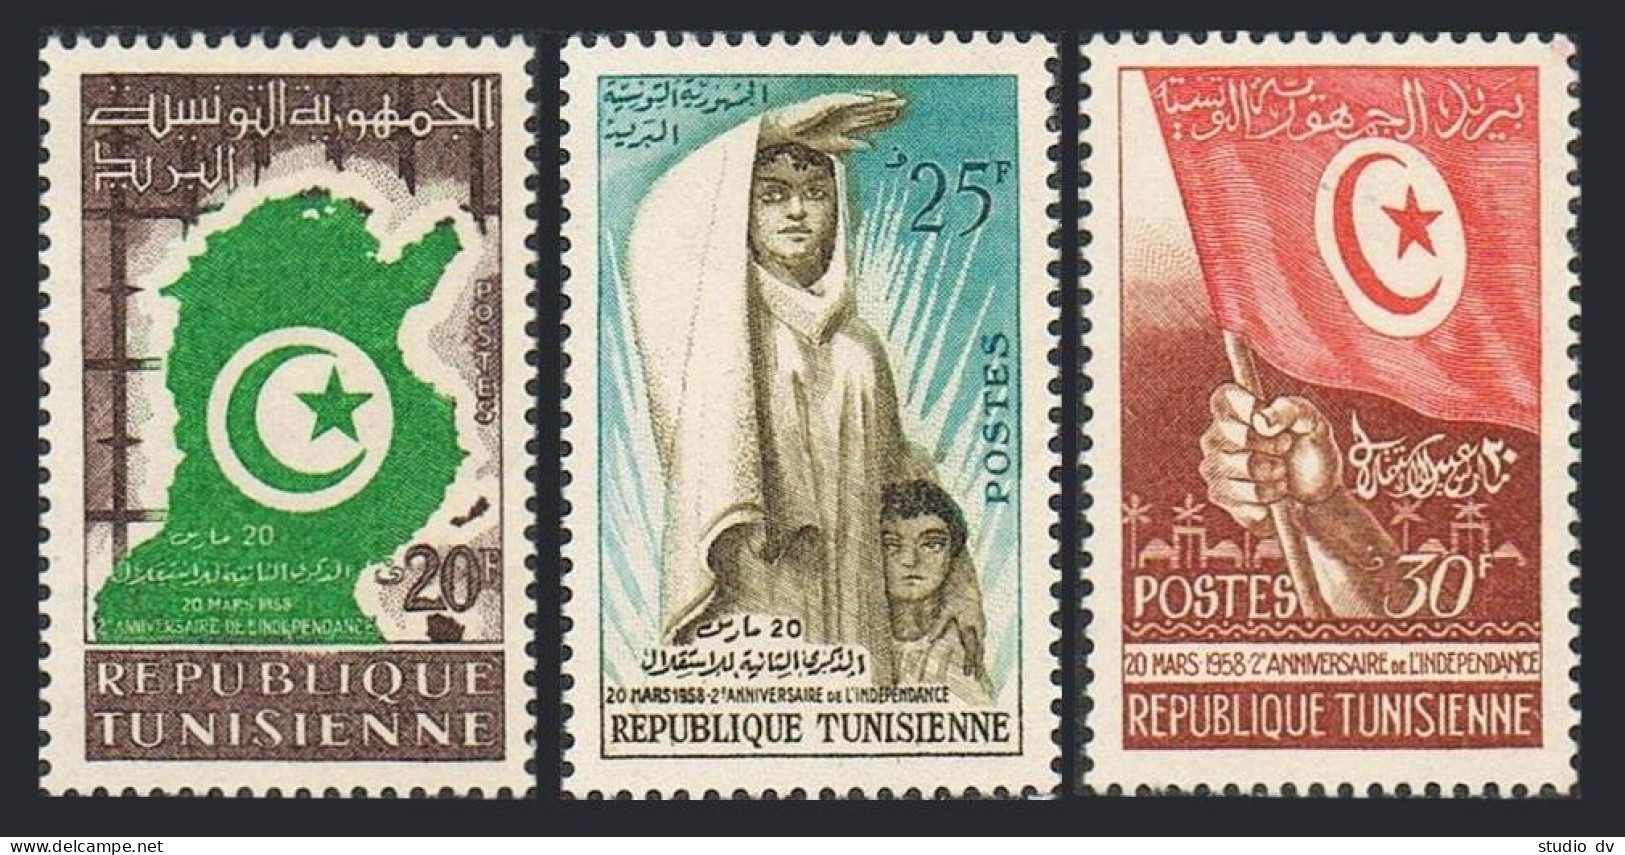 Tunisia 317-319, MNH. Michel 496-498. Independence, 2nd Ann.1958. Map,Arms,Flag. - Tunisia